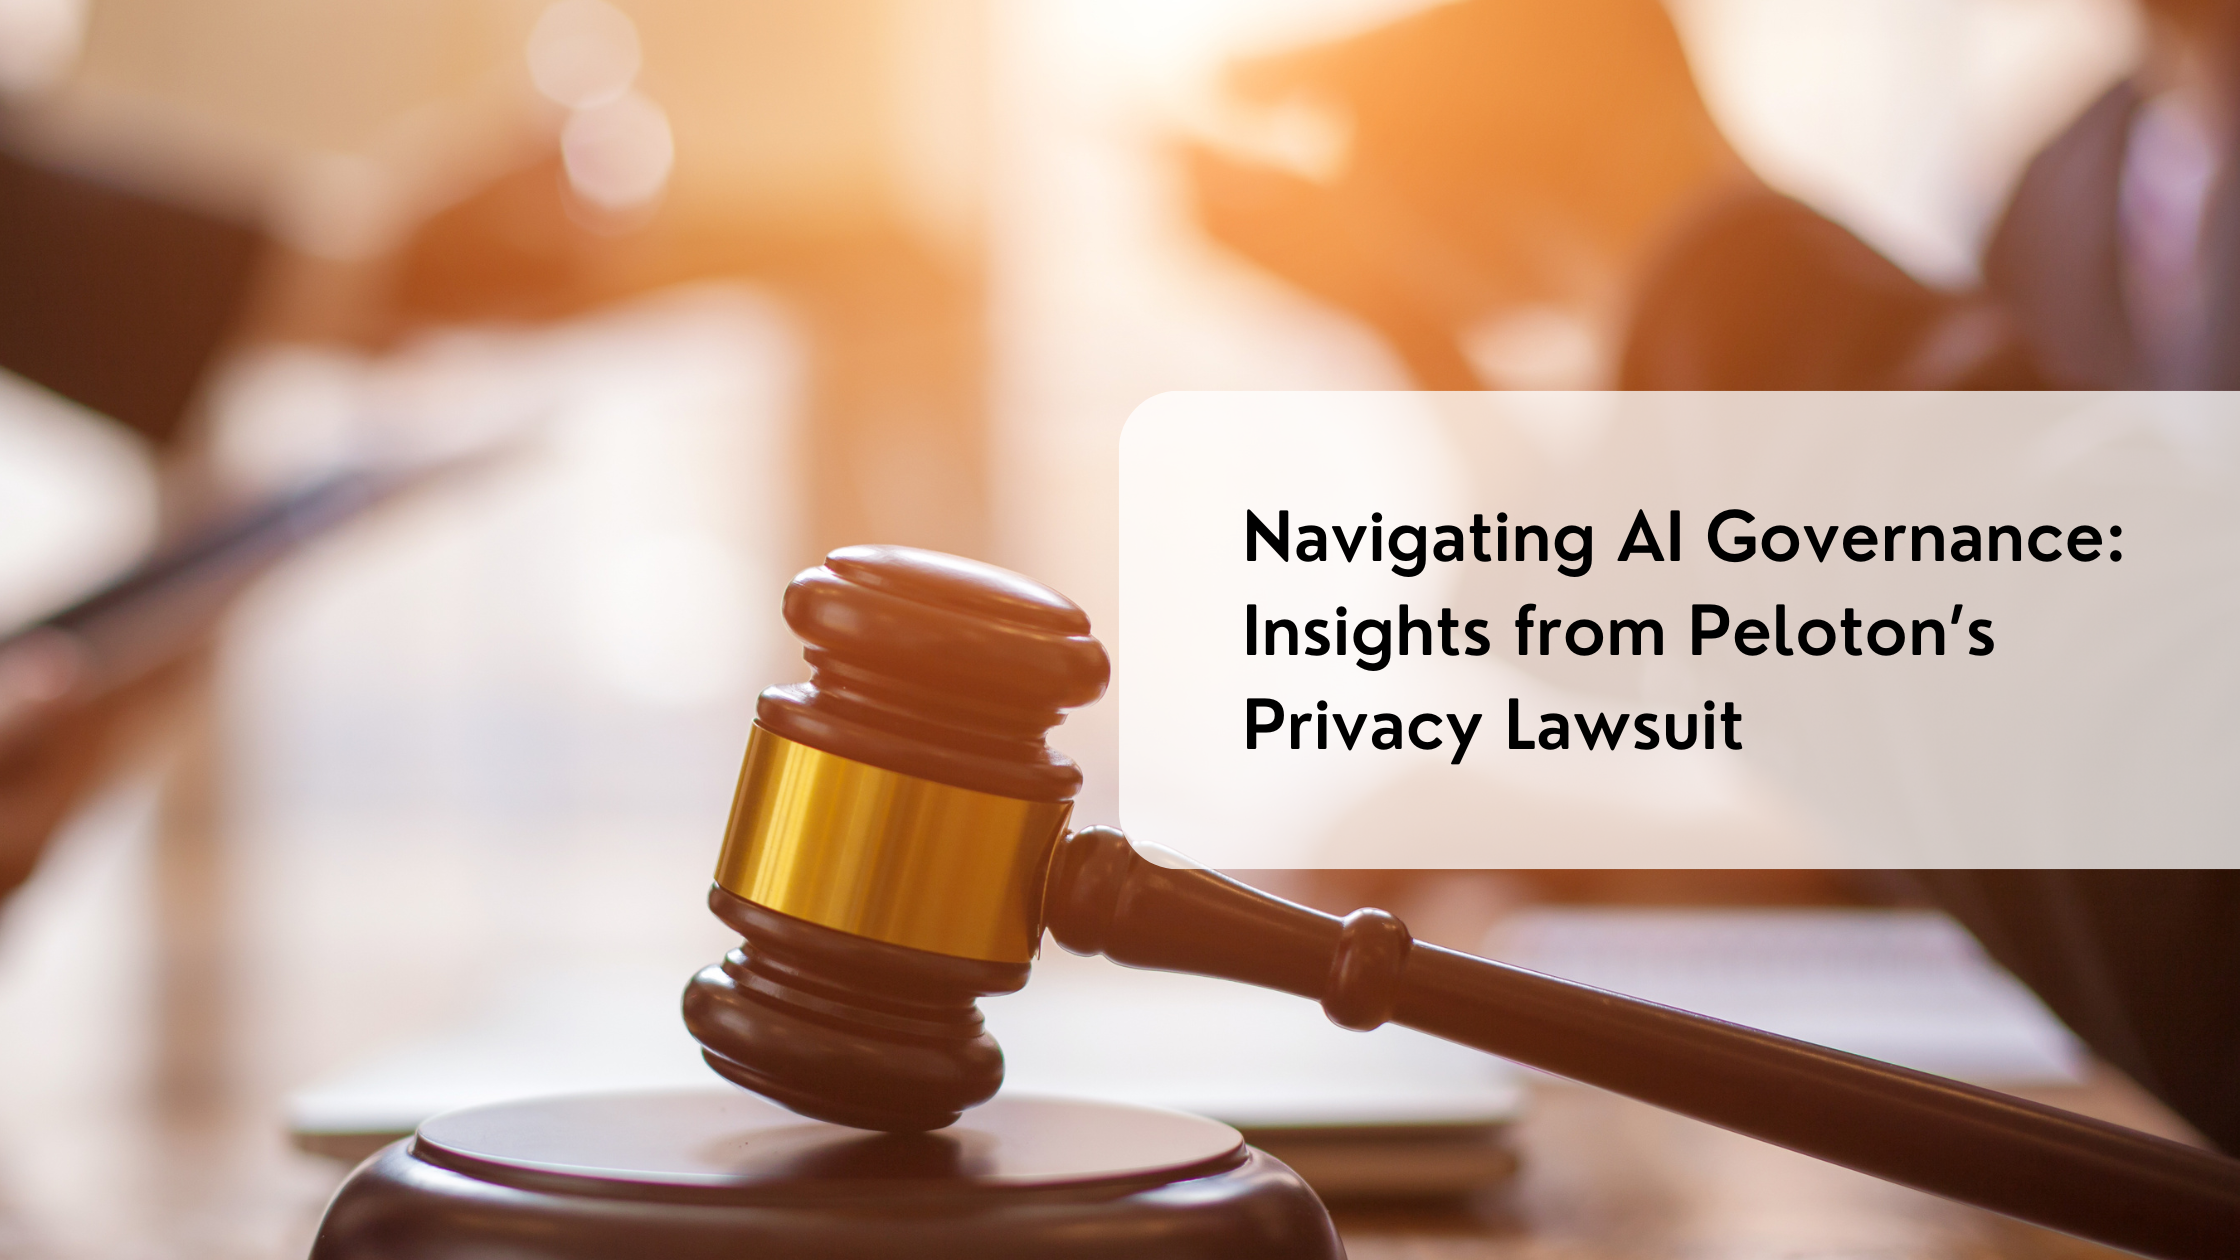 Navigating AI Governance: Insights from Peloton’s Privacy Lawsuit